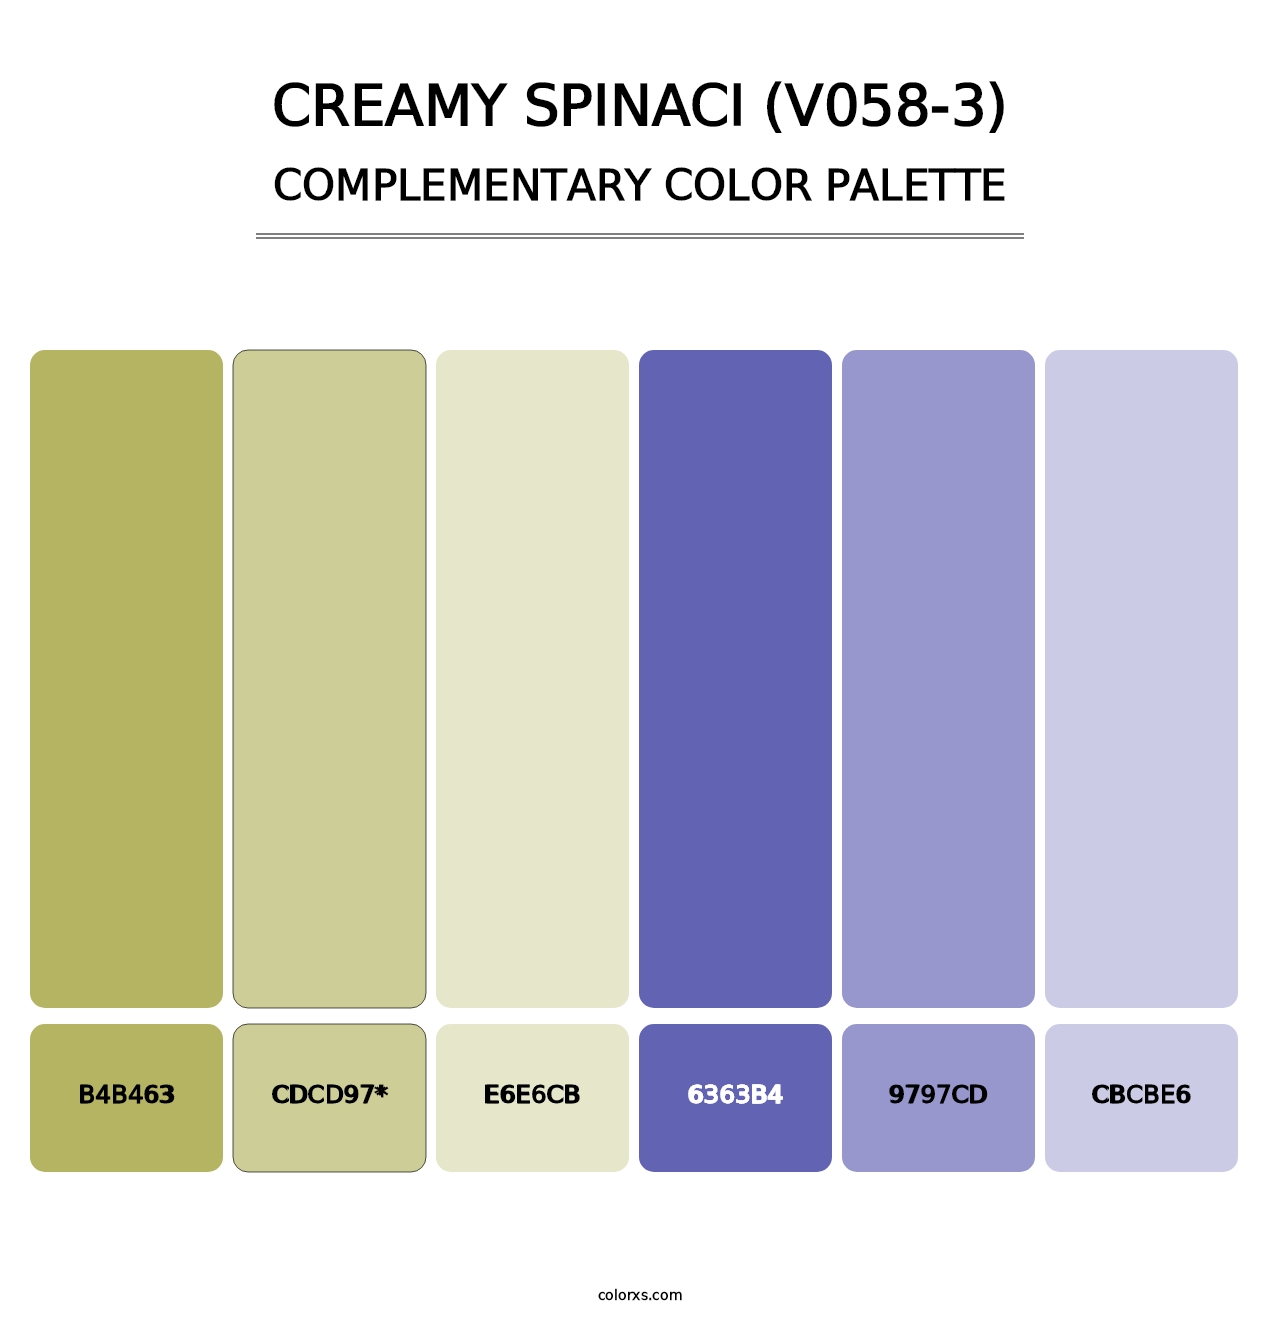 Creamy Spinaci (V058-3) - Complementary Color Palette